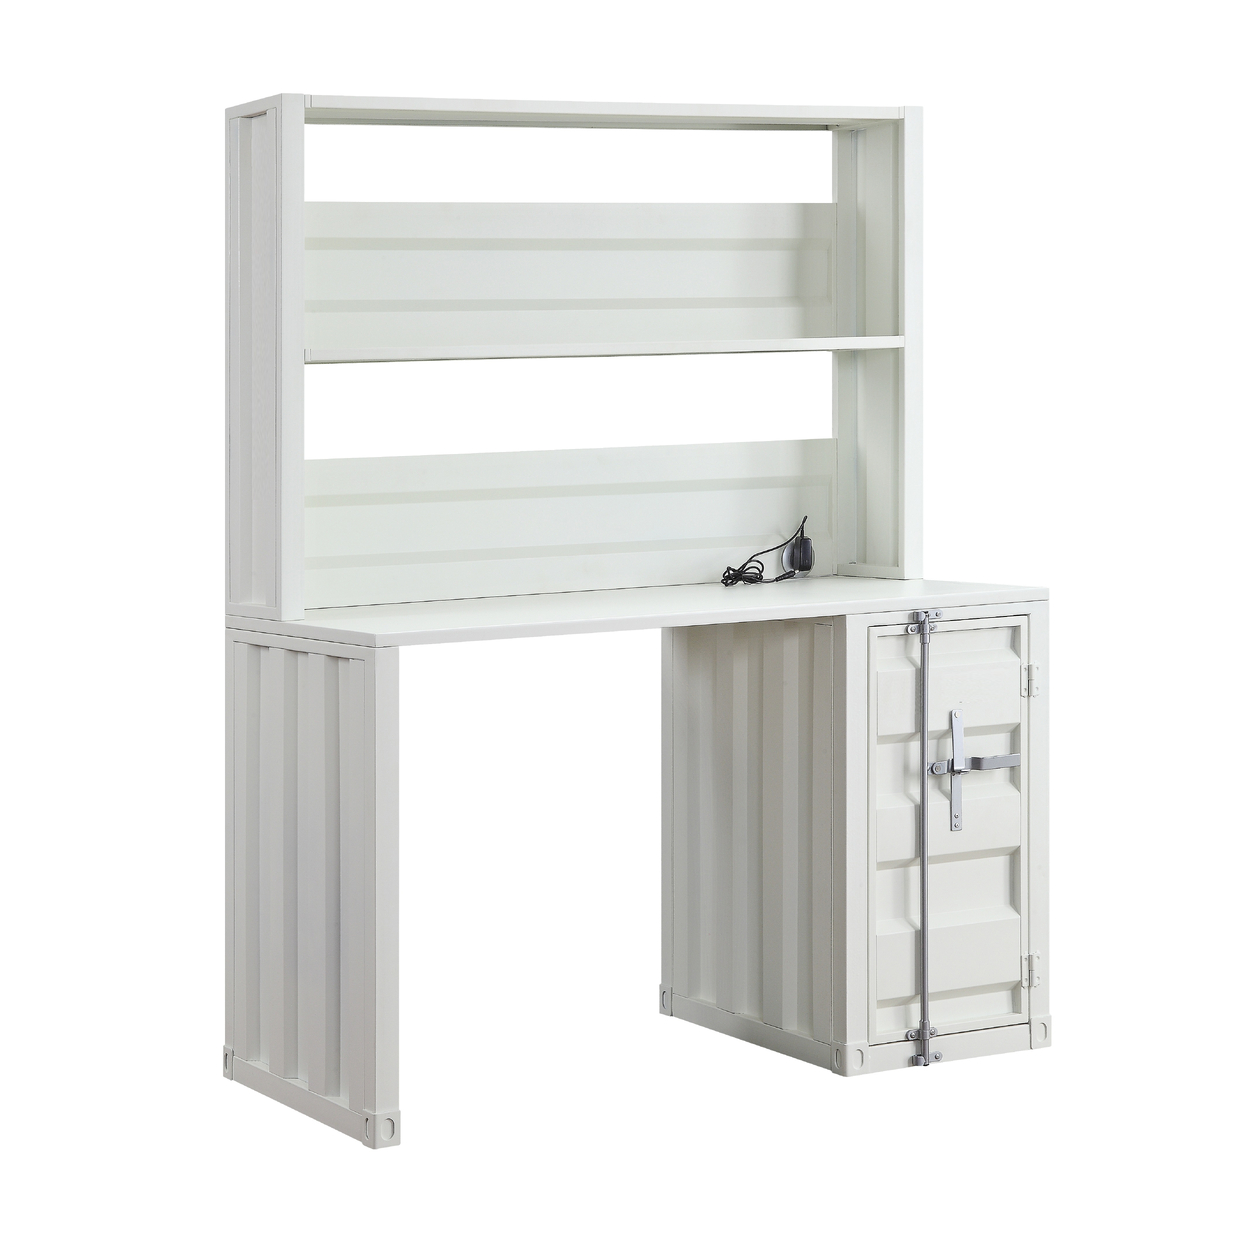 Metal Base Desk And Hutch With Slated Pattern And Storage Compartment, White- Saltoro Sherpi